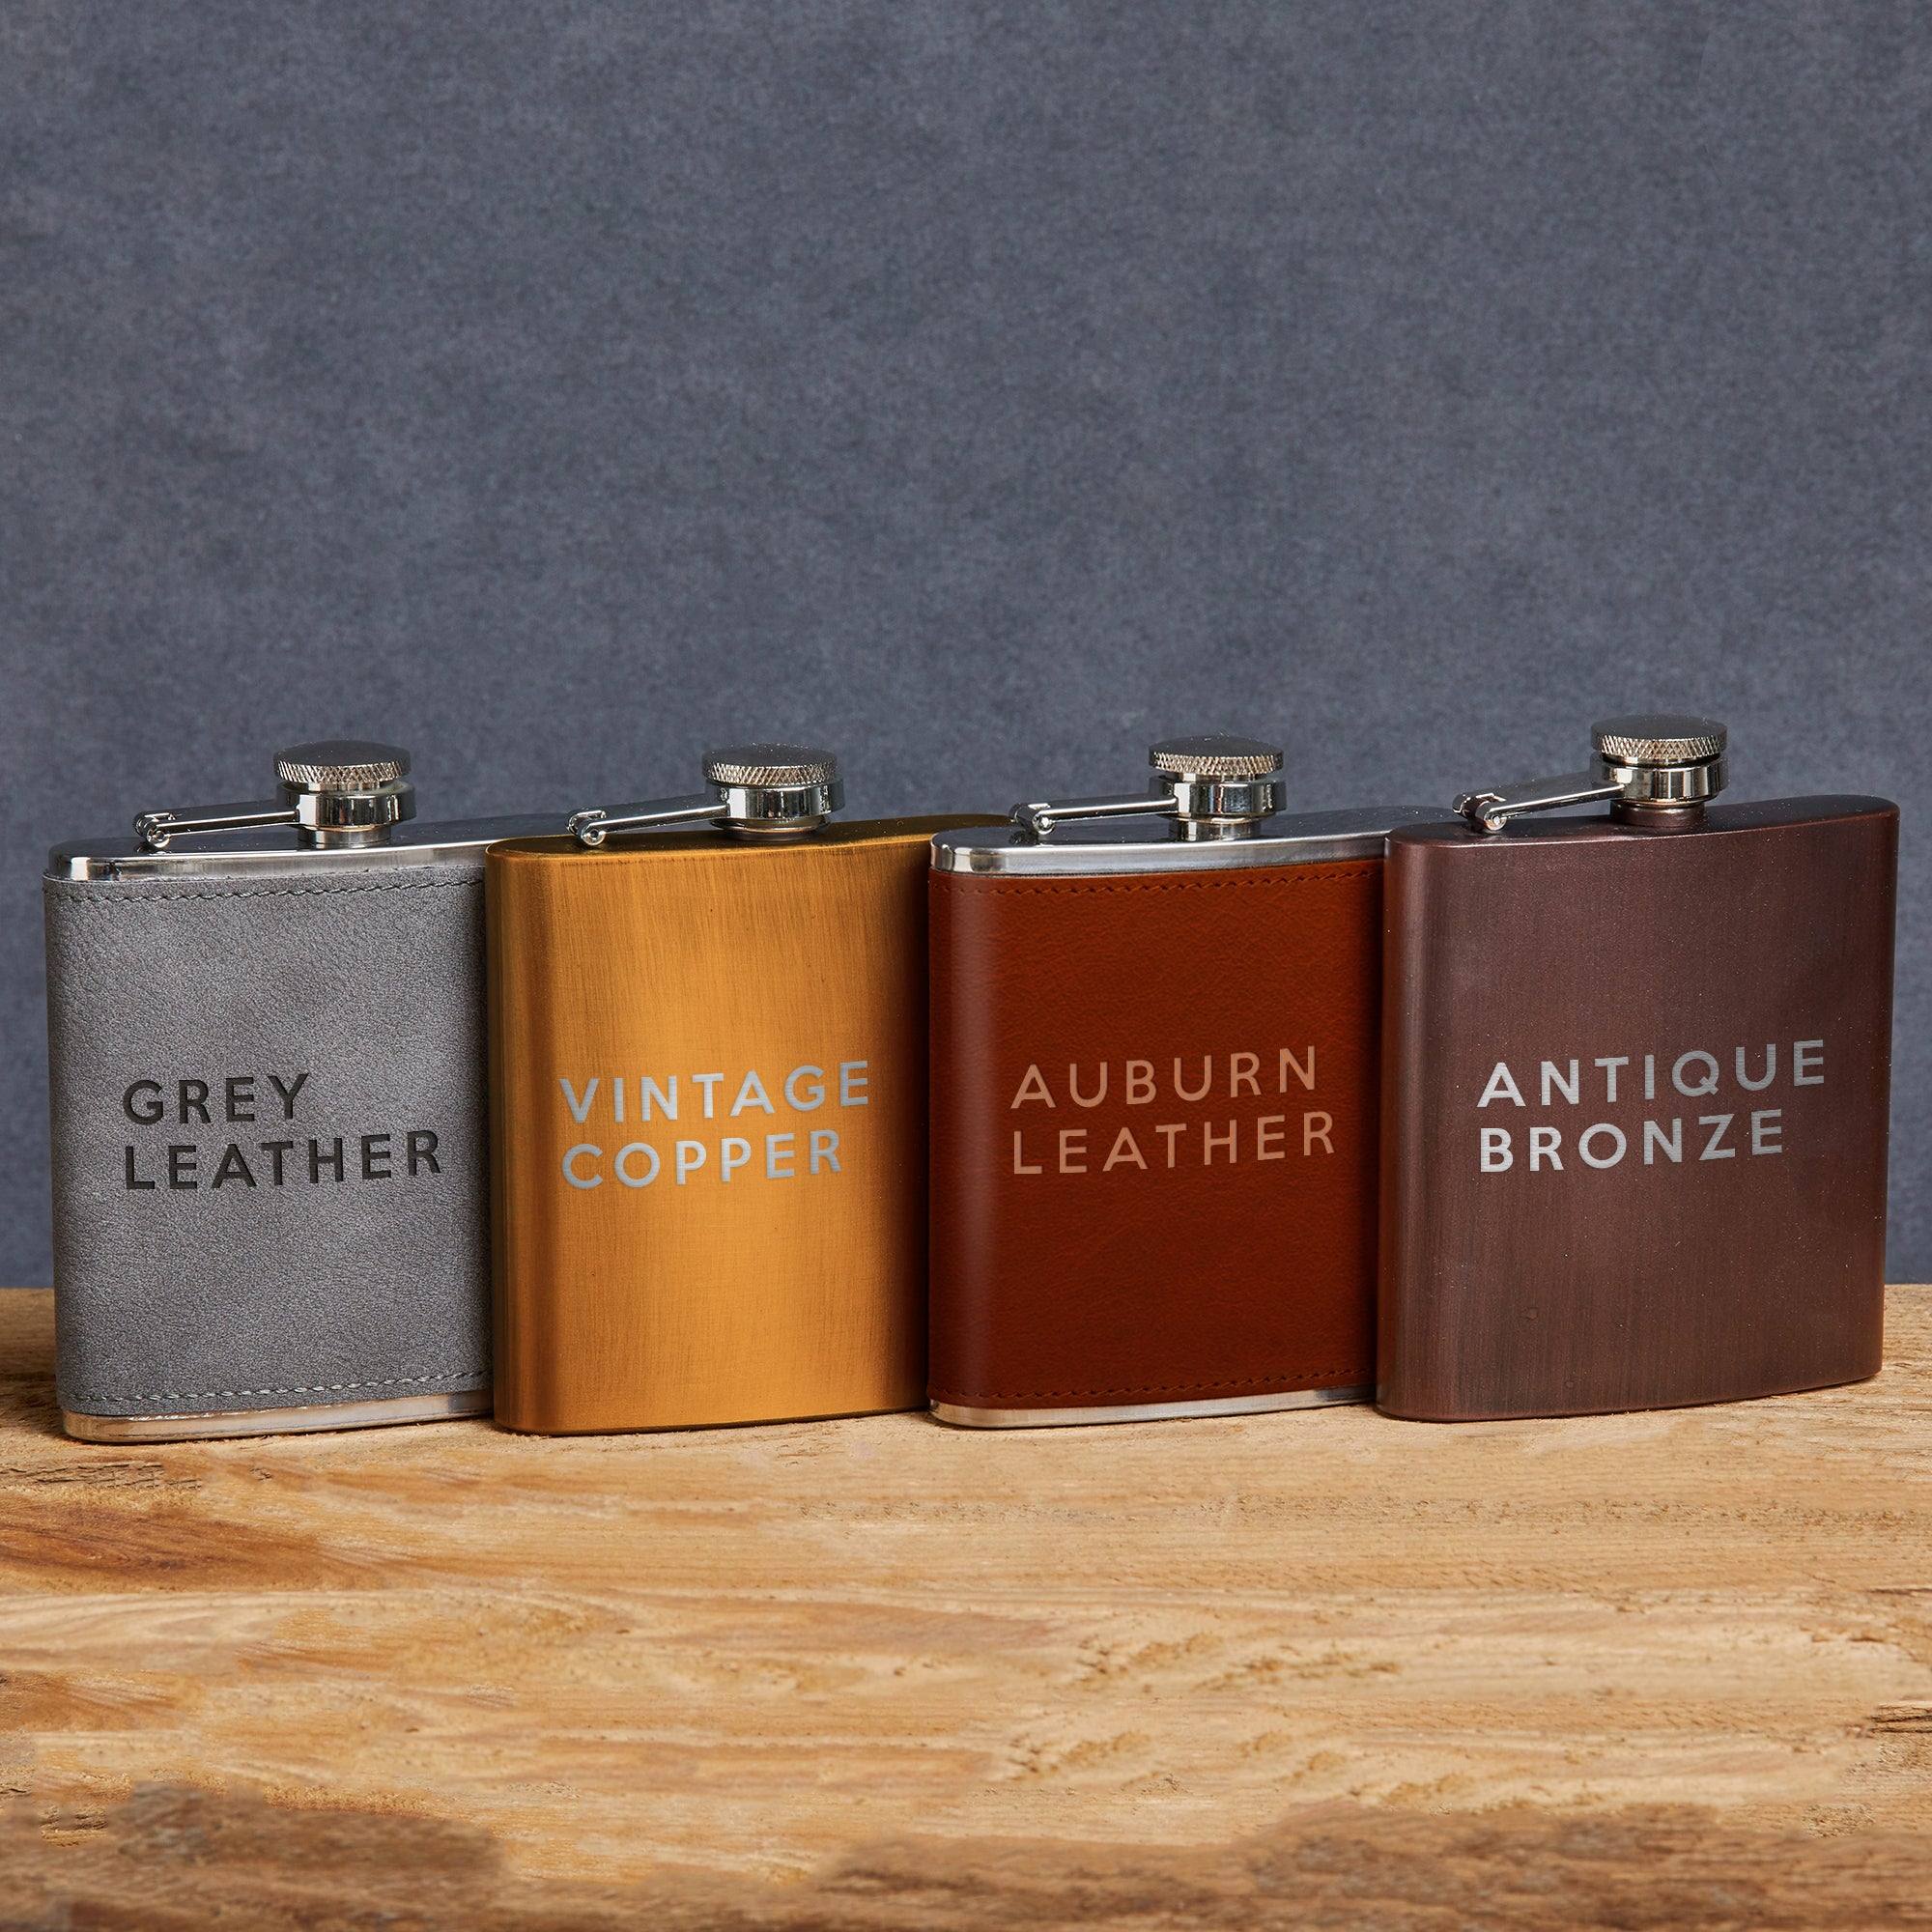 Personalised Hip Flask For Men - Dustandthings.com